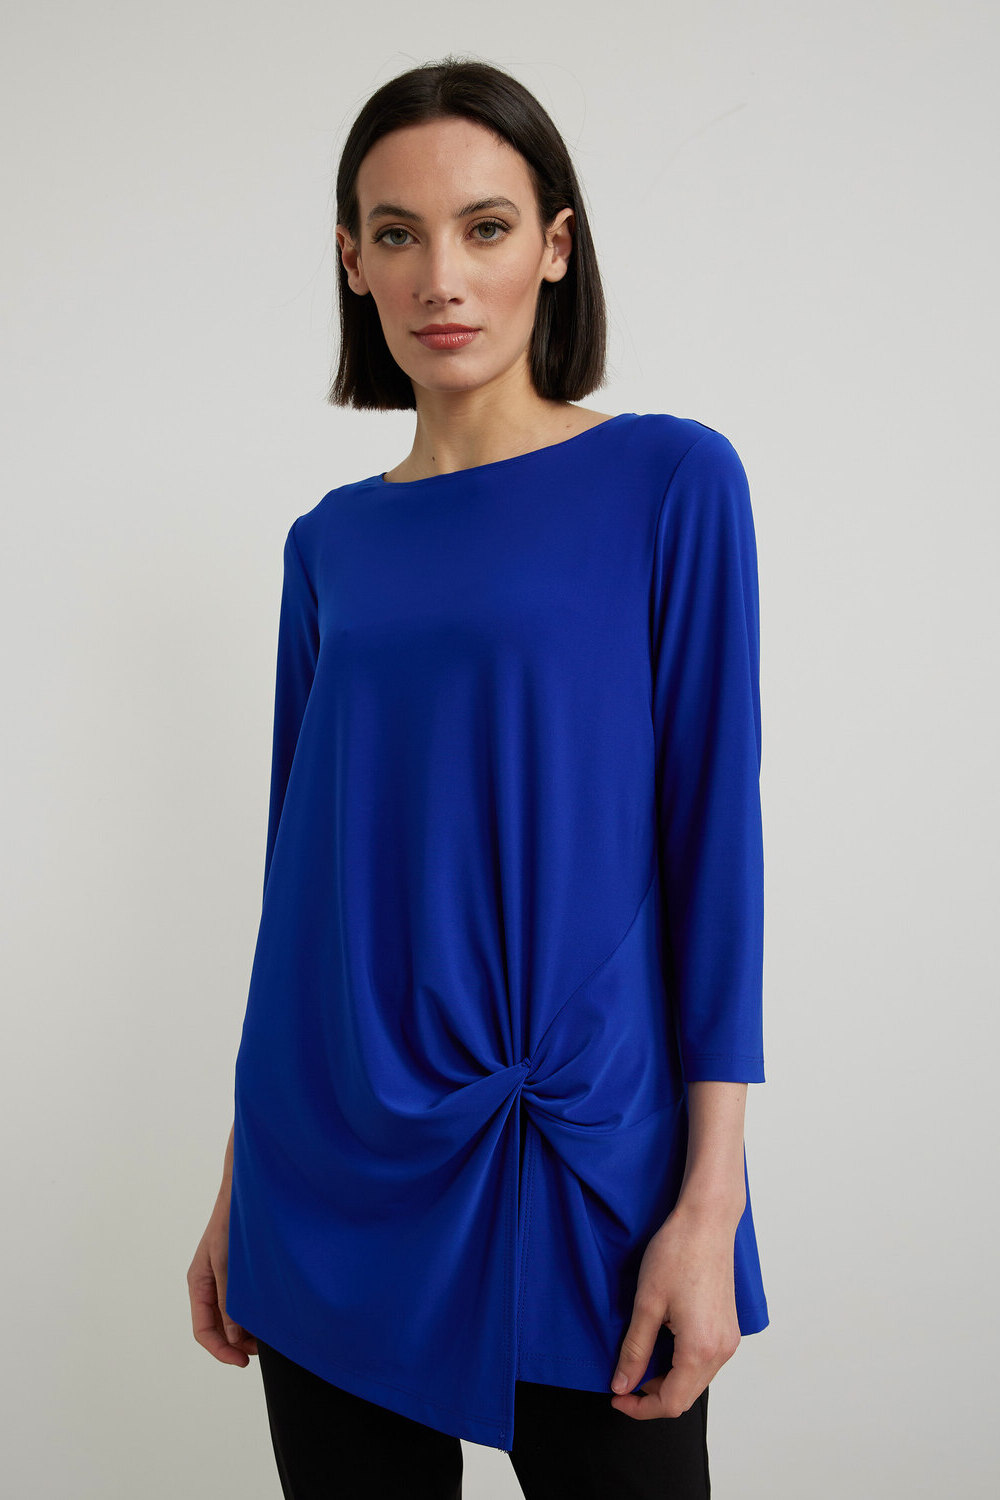 Joseph Ribkoff Knotted Front Top Style 213584. Royal Sapphire 163